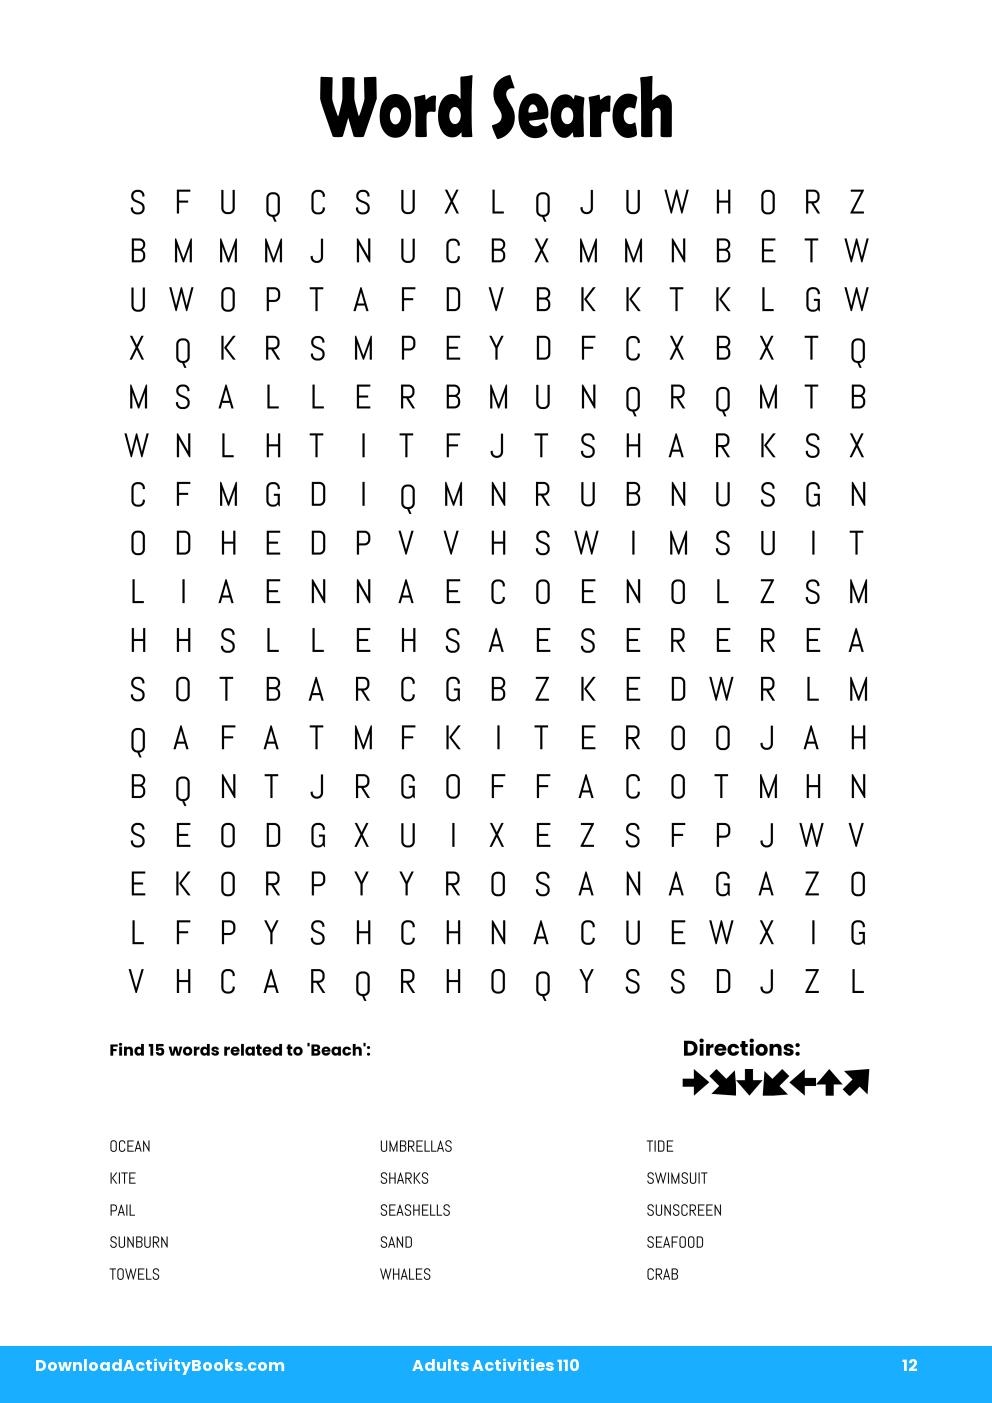 Word Search in Adults Activities 110